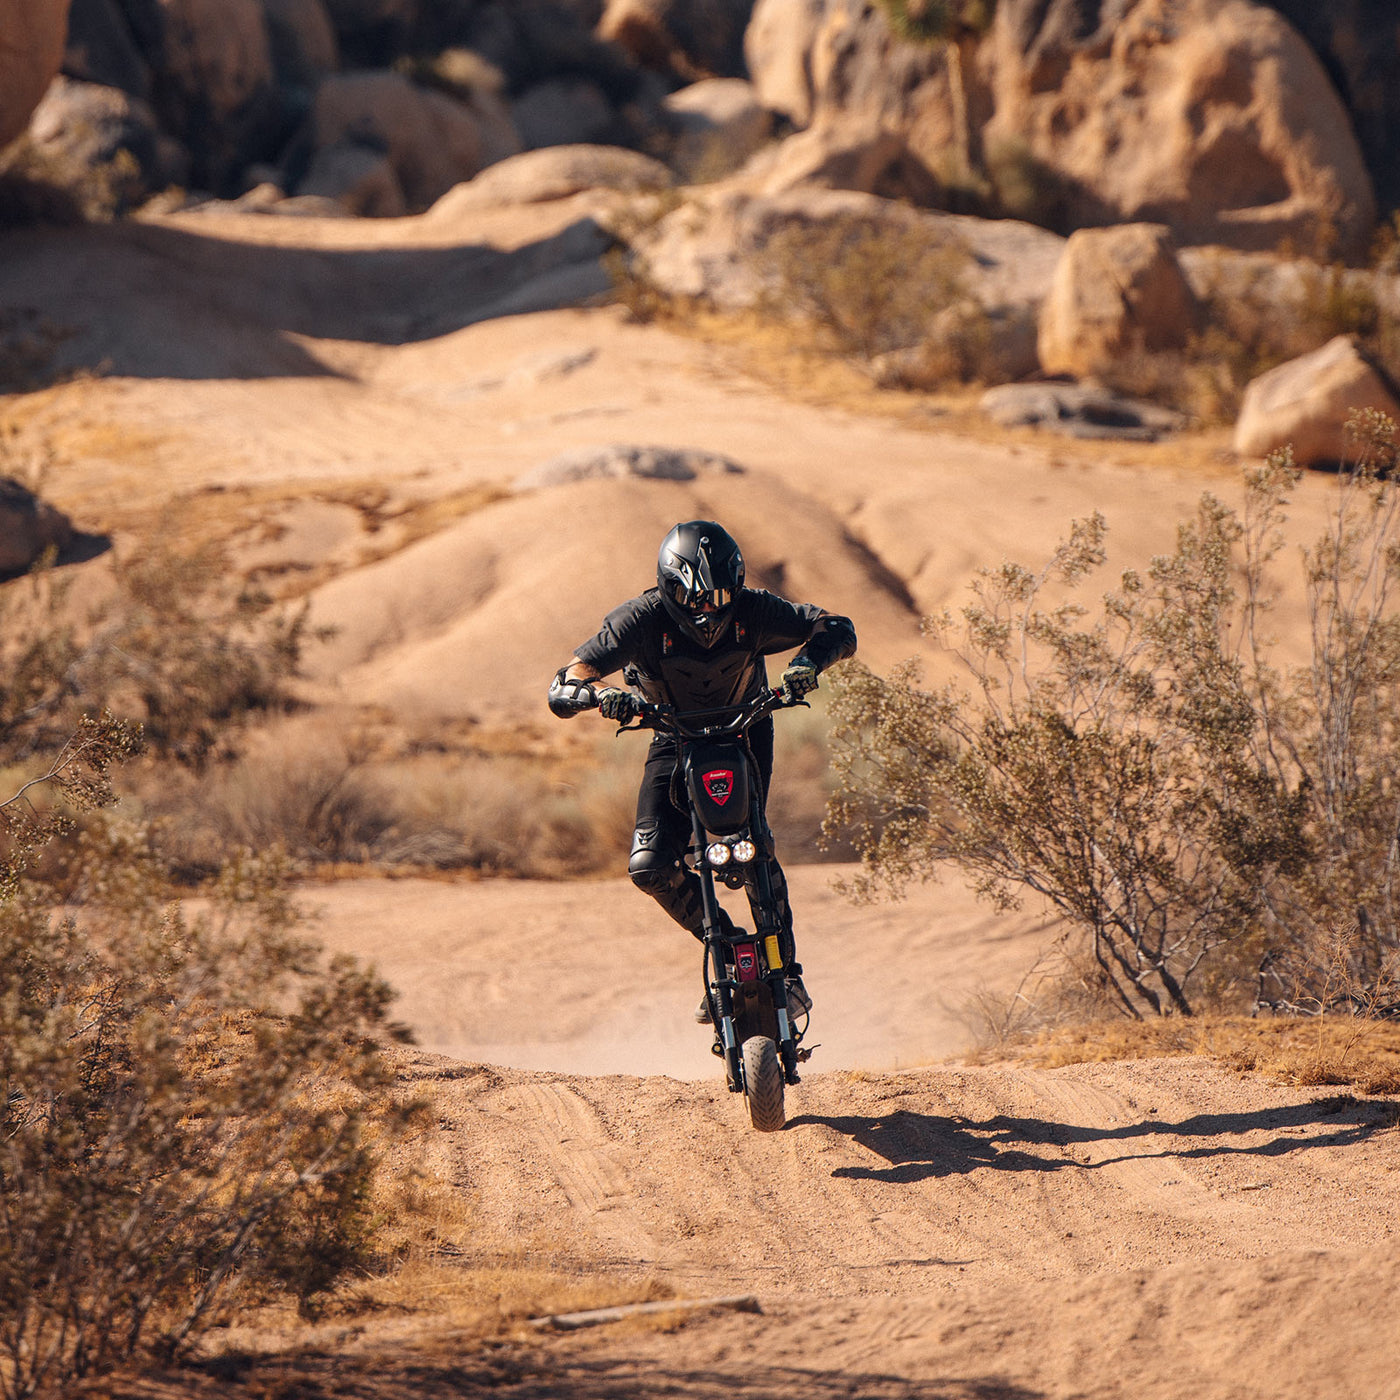 A rider on a Kaabo Wolf Warrior 11 Pro+ electric scooter catching air over a desert trail, demonstrating the scooter’s off-road capabilities and high performance.